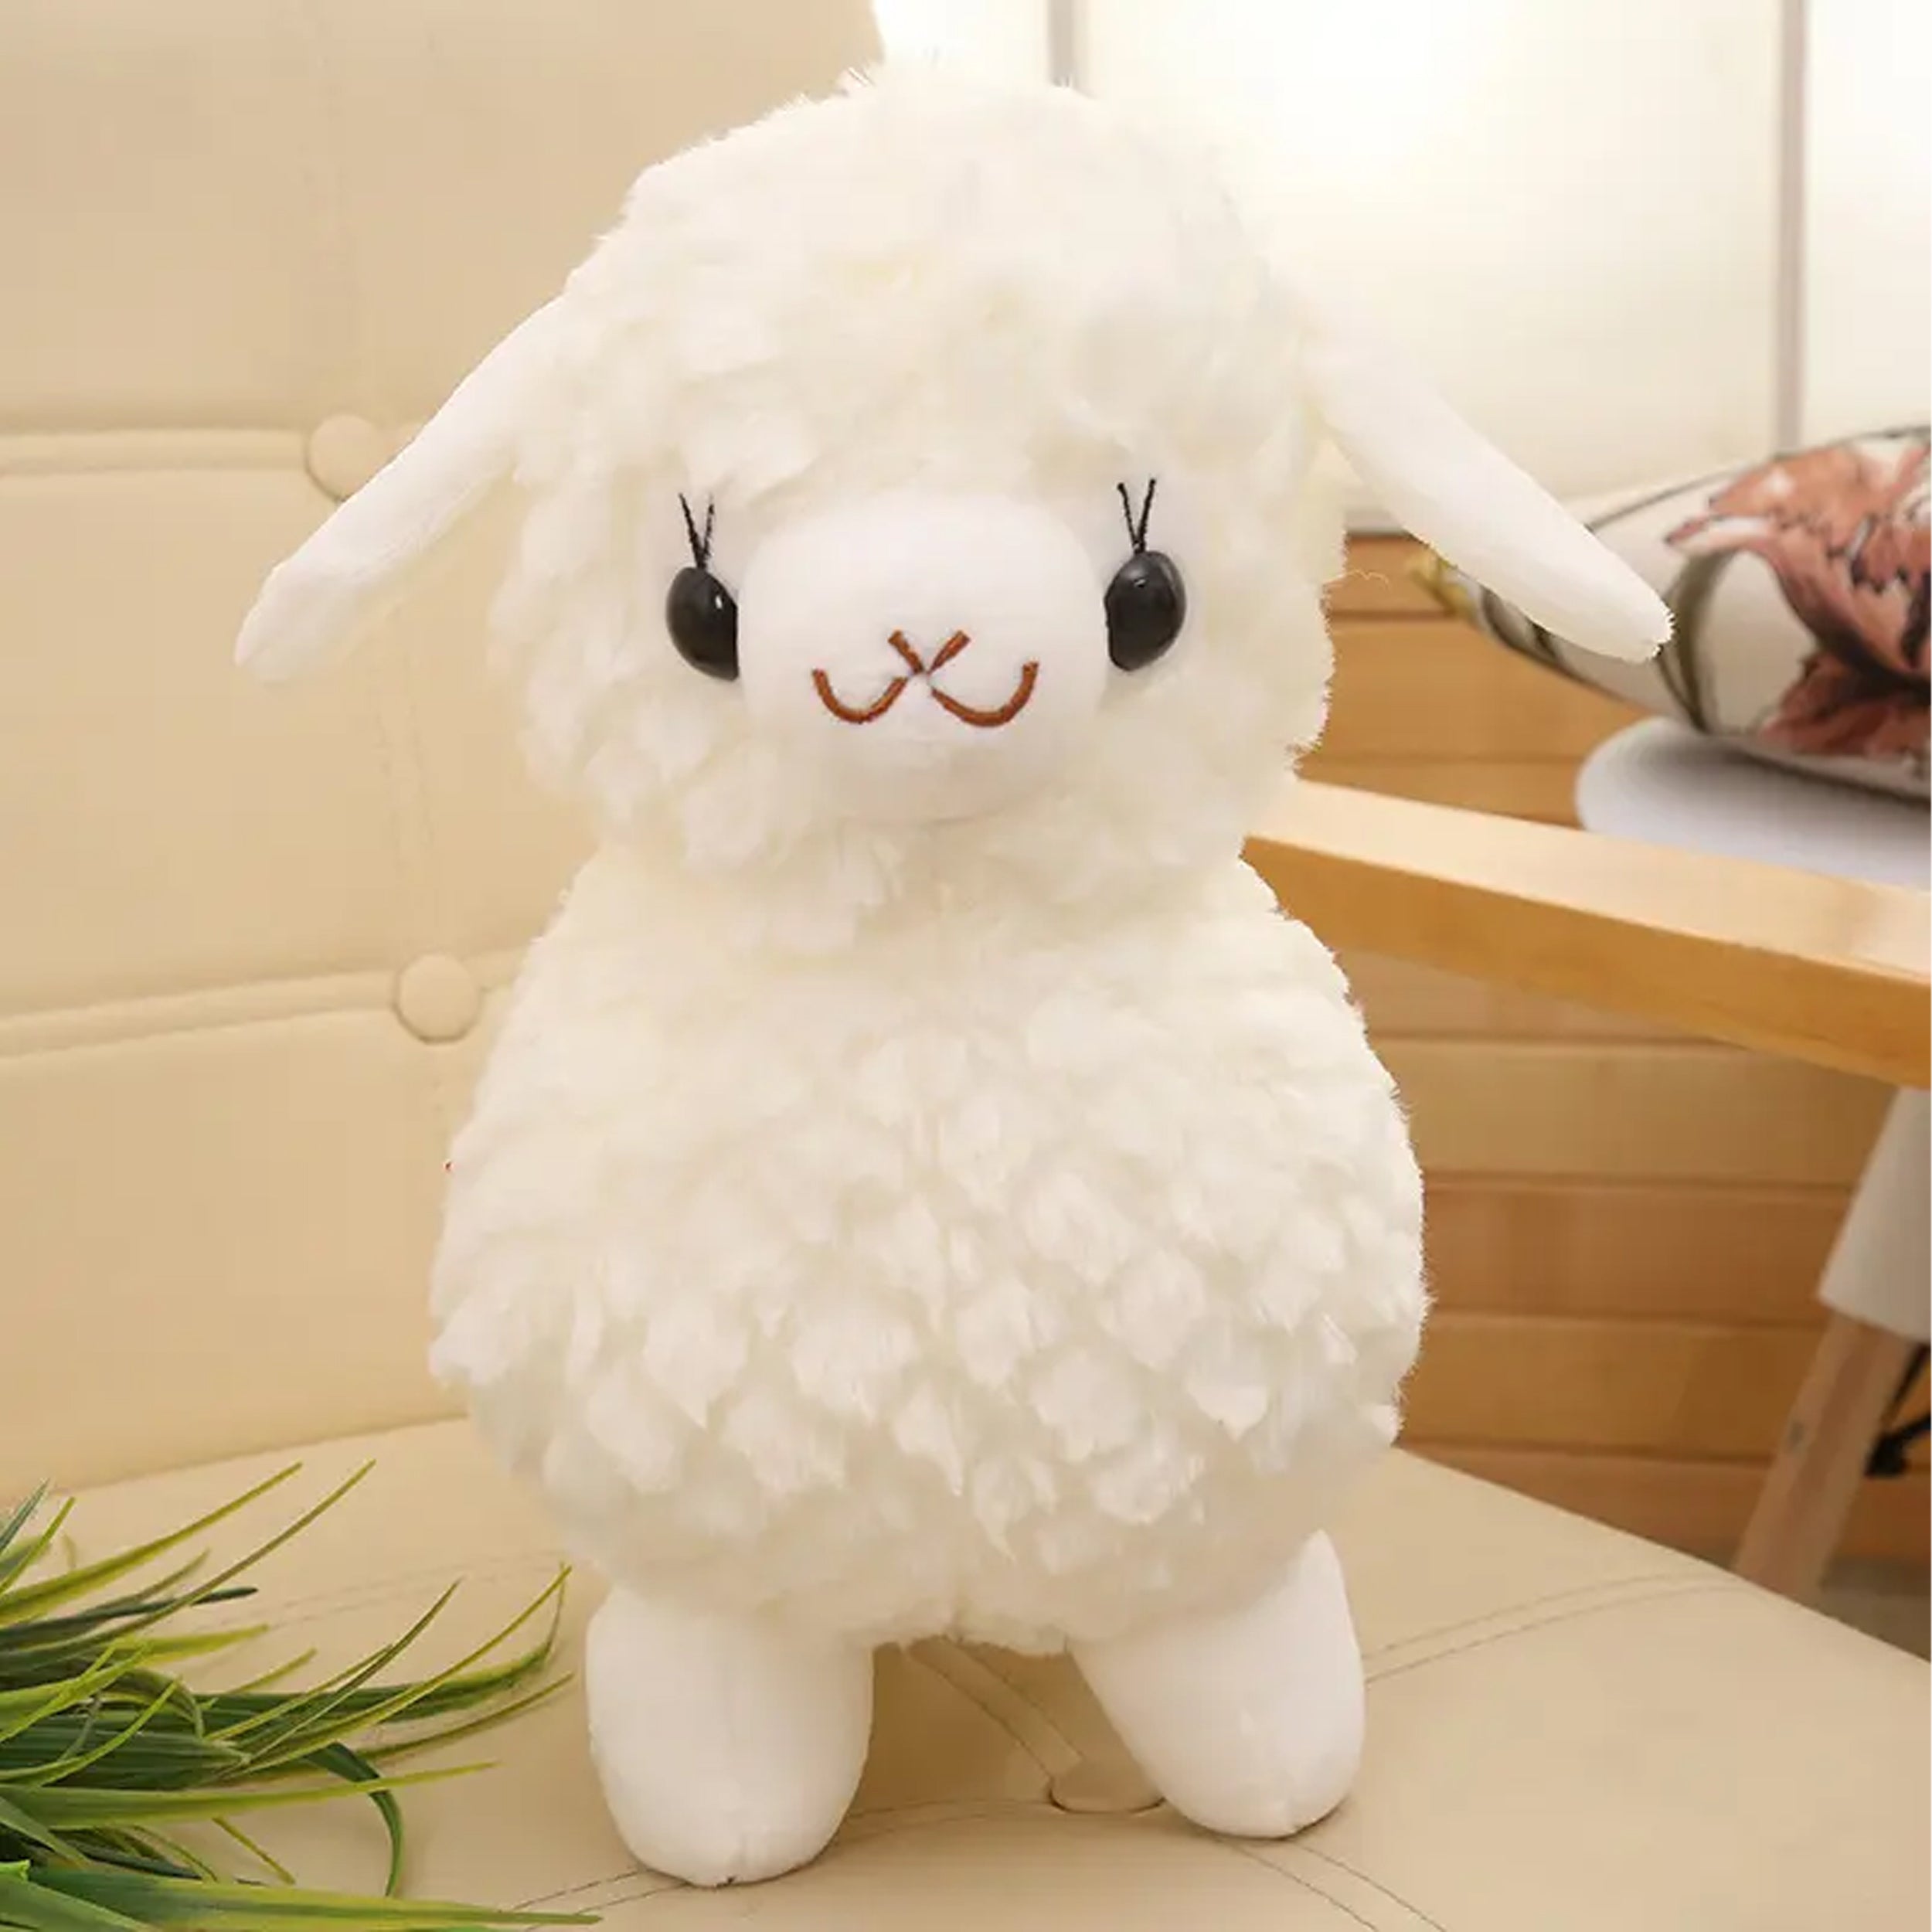 Baby Cutie Little Lamb Stuffed Plush Toy – Soft and Cuddly Animal Toy for Infants and Toddlers